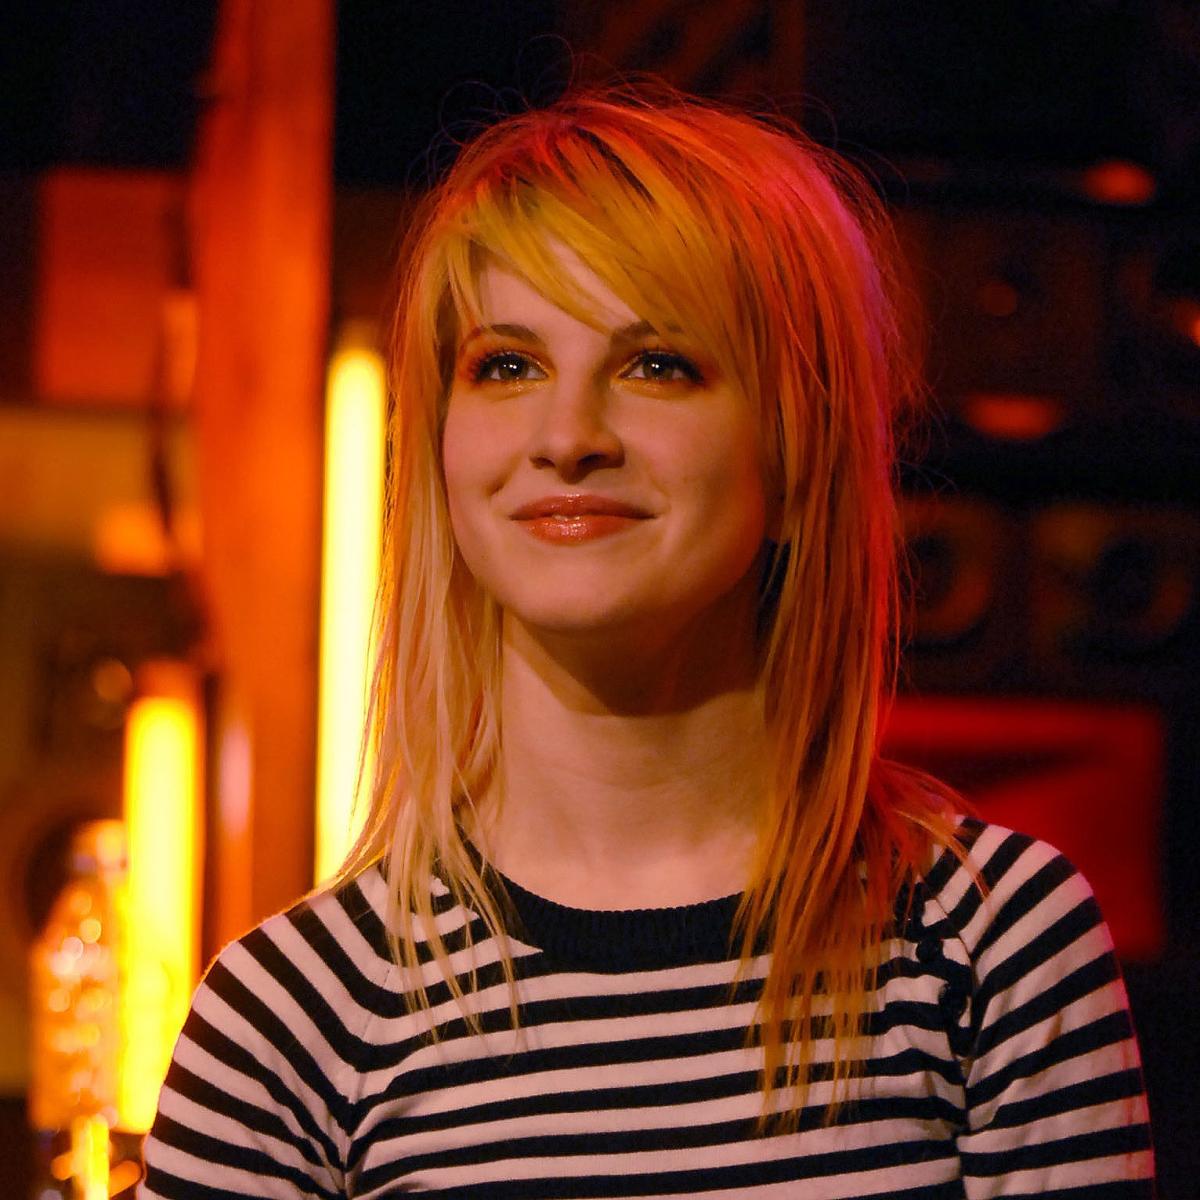 Hayley Williams's Best Hair Colors, Cuts, and Styles Throughout the Years